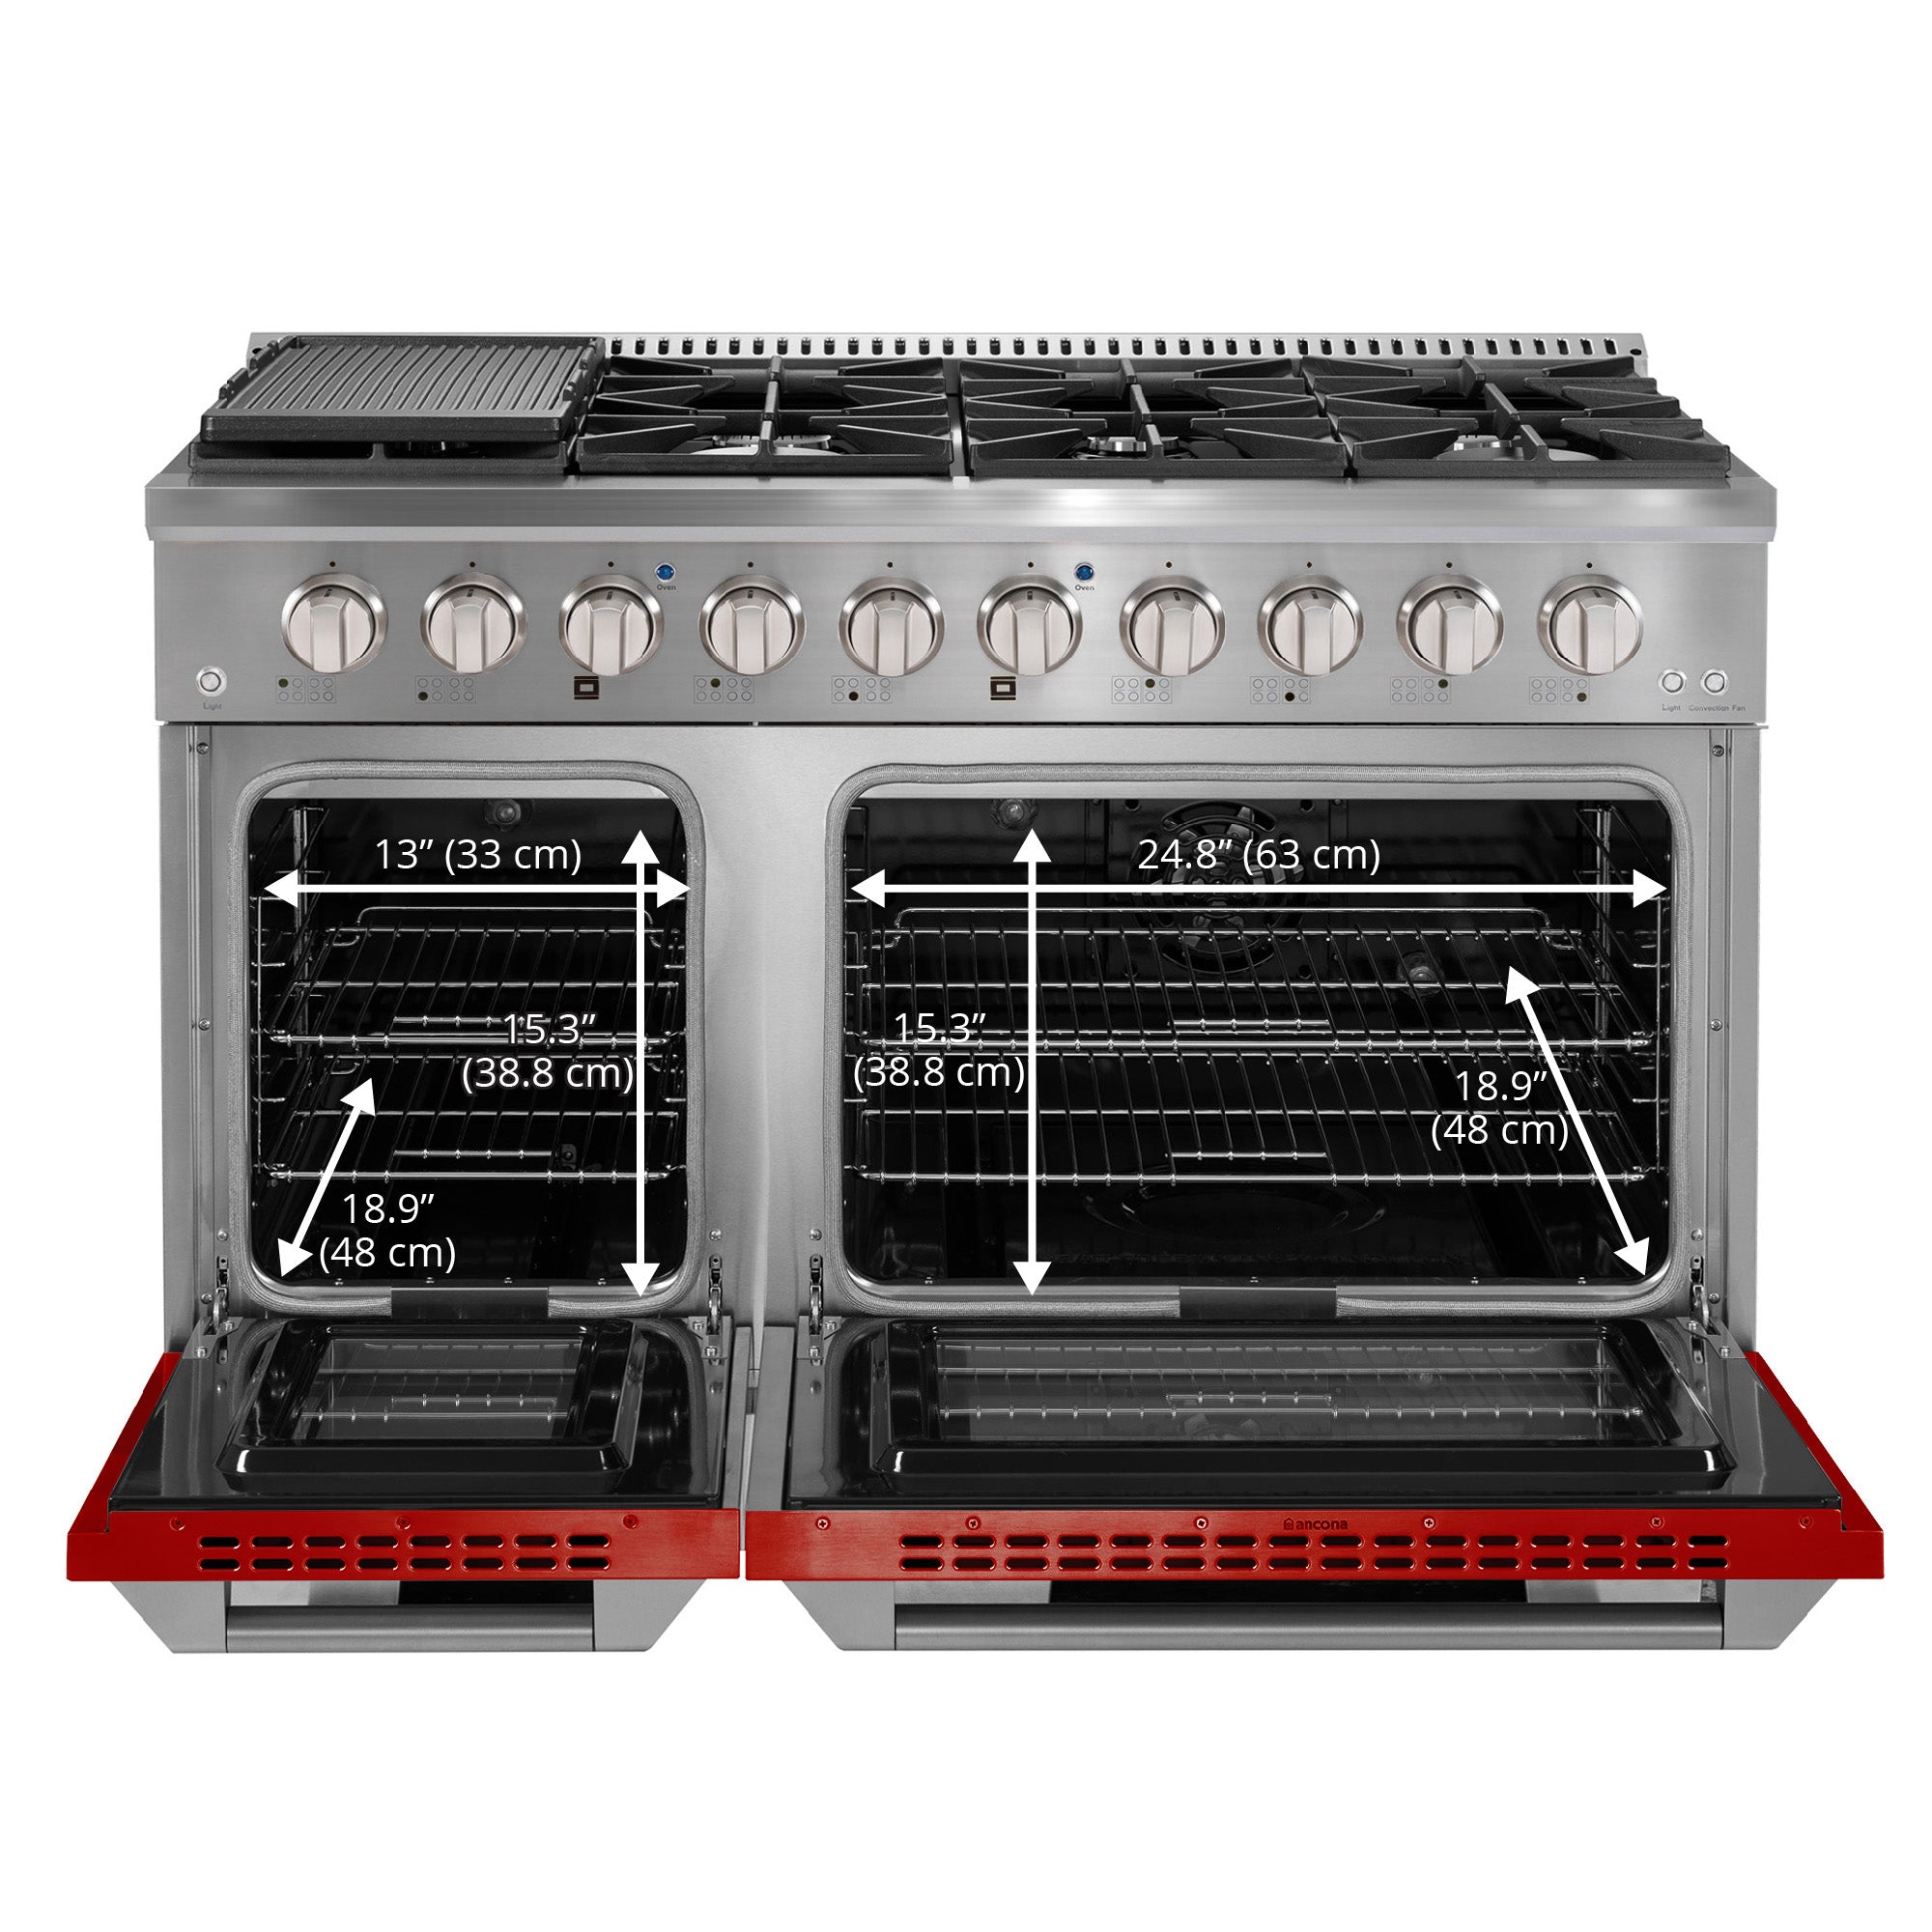 Ancona 48” 6.7 cu. Ft Double Oven Dual Fuel Range with 8 Burners, Griddle and Convection Ovens in Stainless Steel and Red